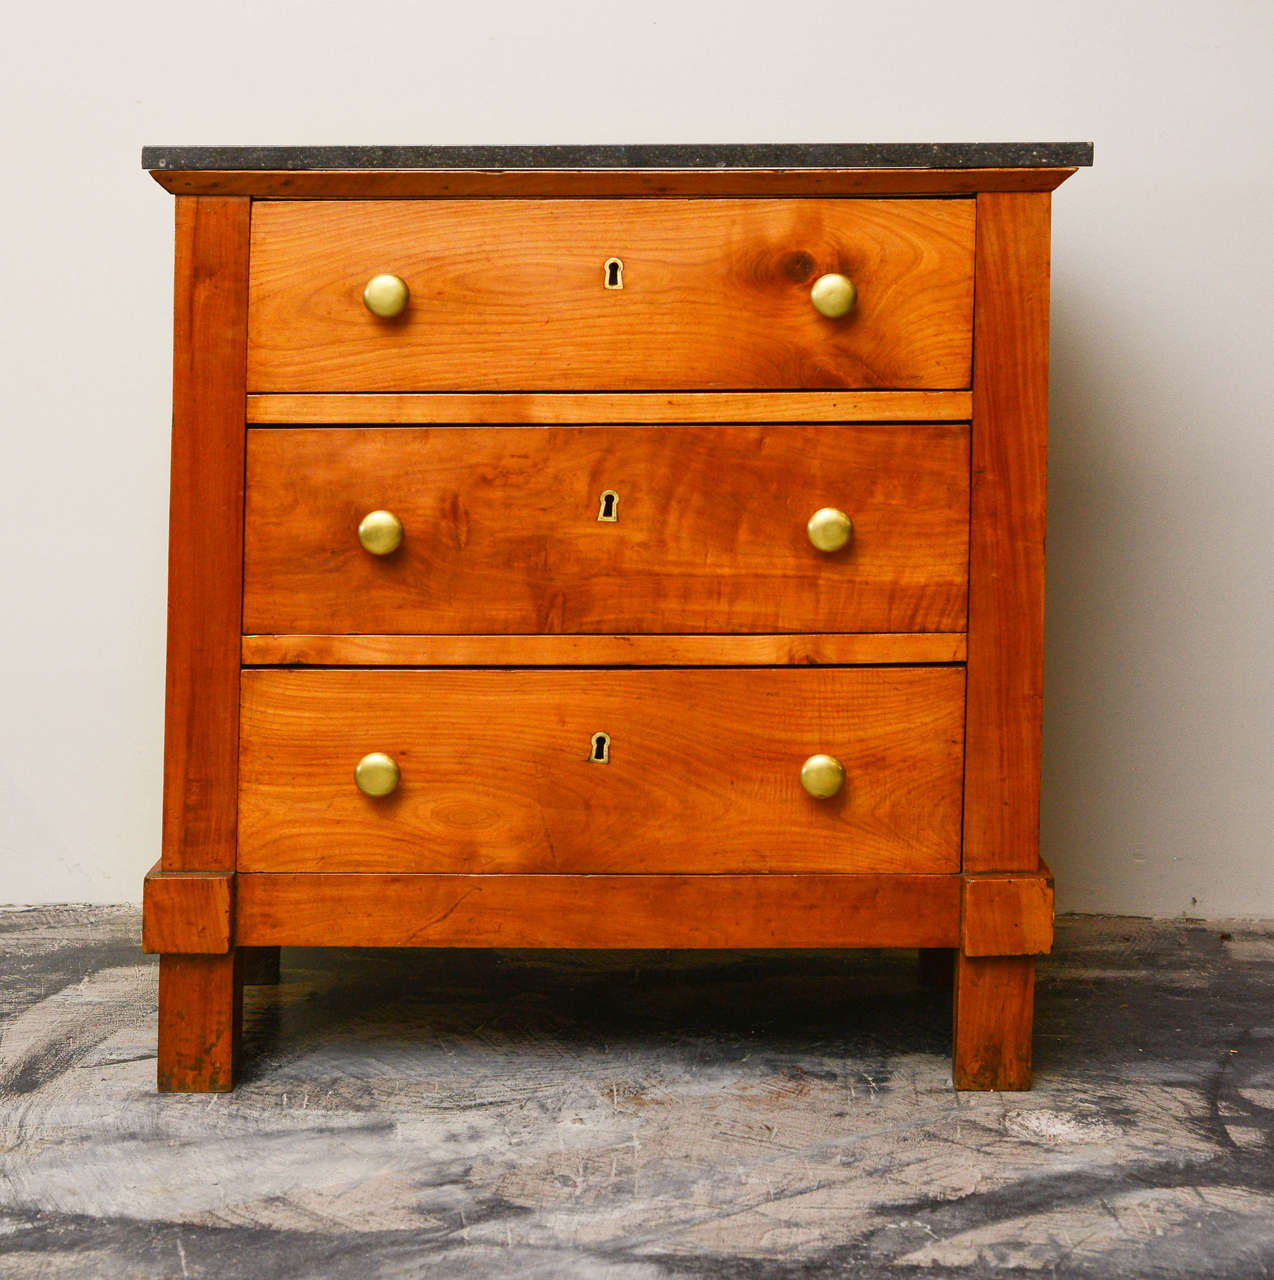 Northern Italian Fruitwood and Fossilized Marble Top Three-Drawer Chest of Drawers, Circa 1890